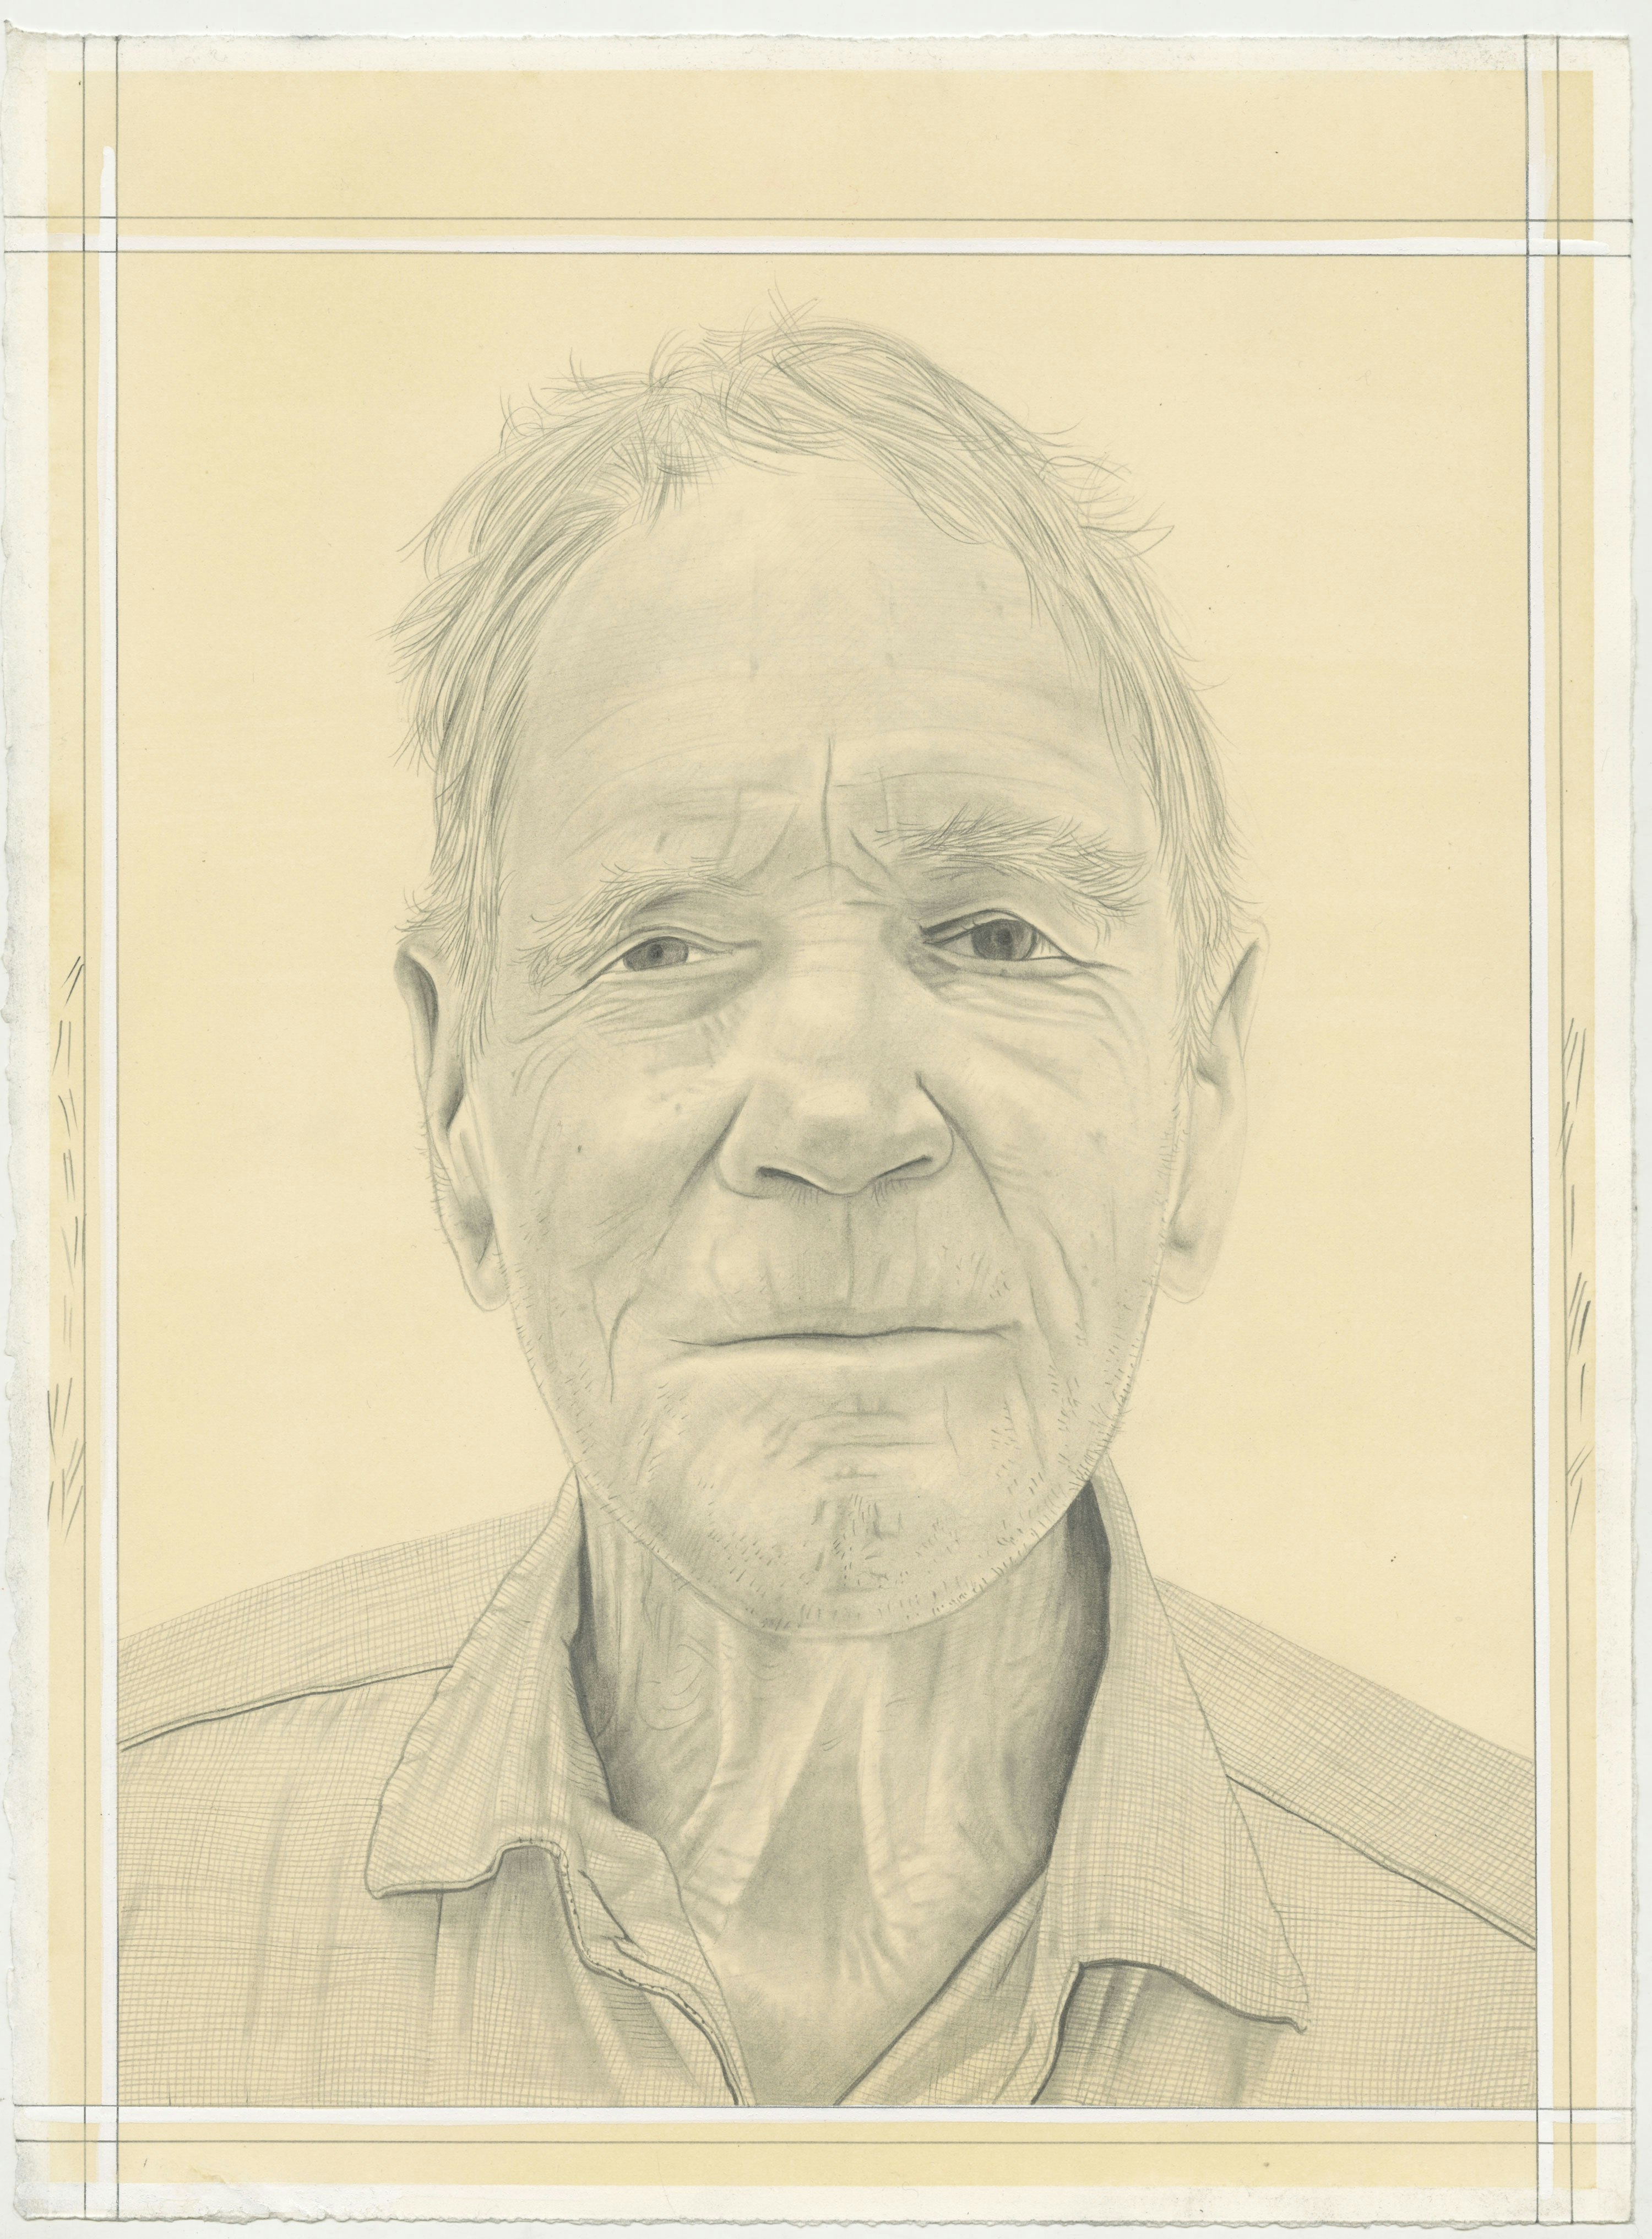 Portrait of Alex Hay, pencil on paper by Phong H. Bui.